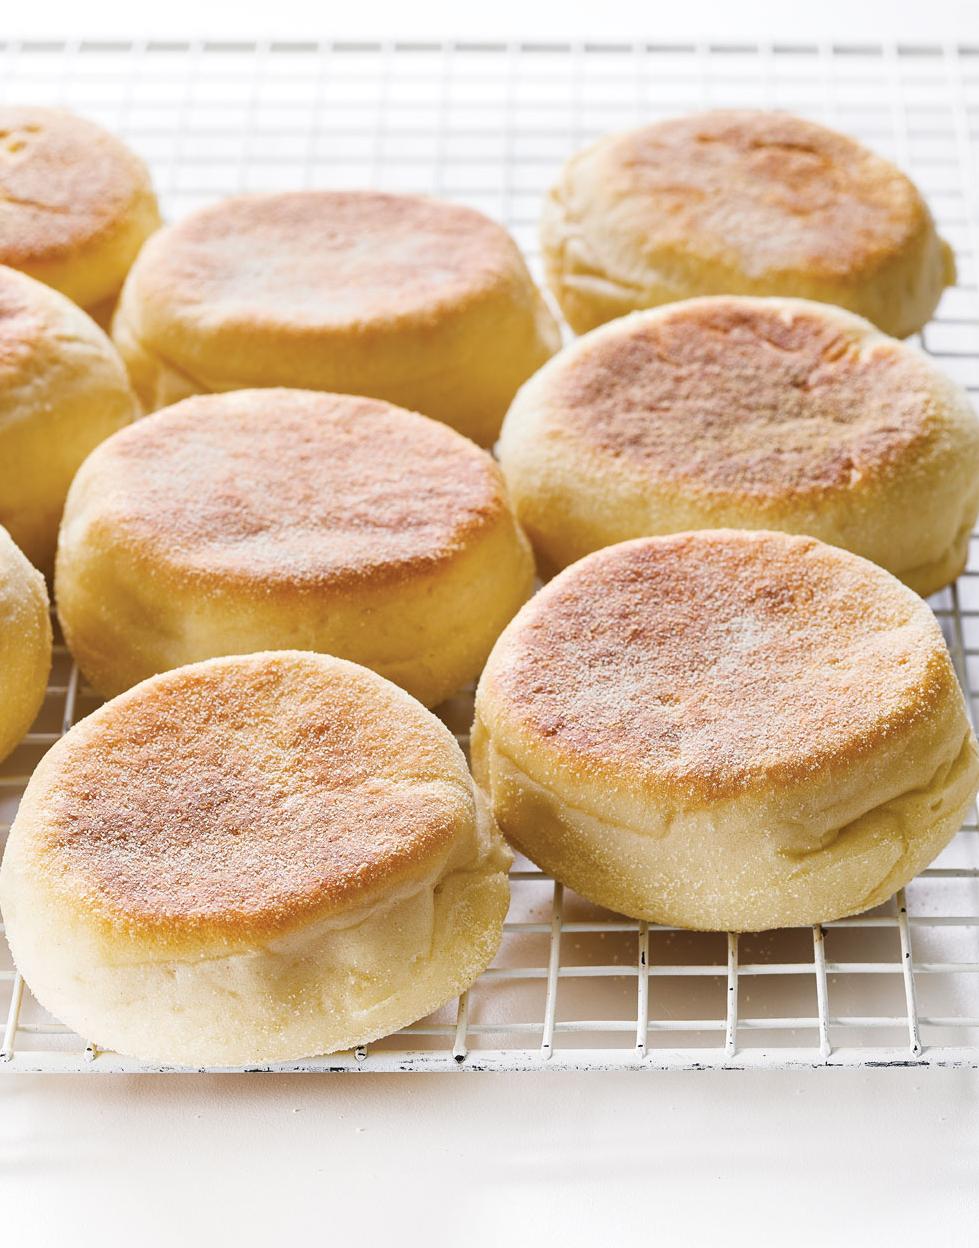  These golden-brown beauties are begging to be toasted and topped with your favorite jam.